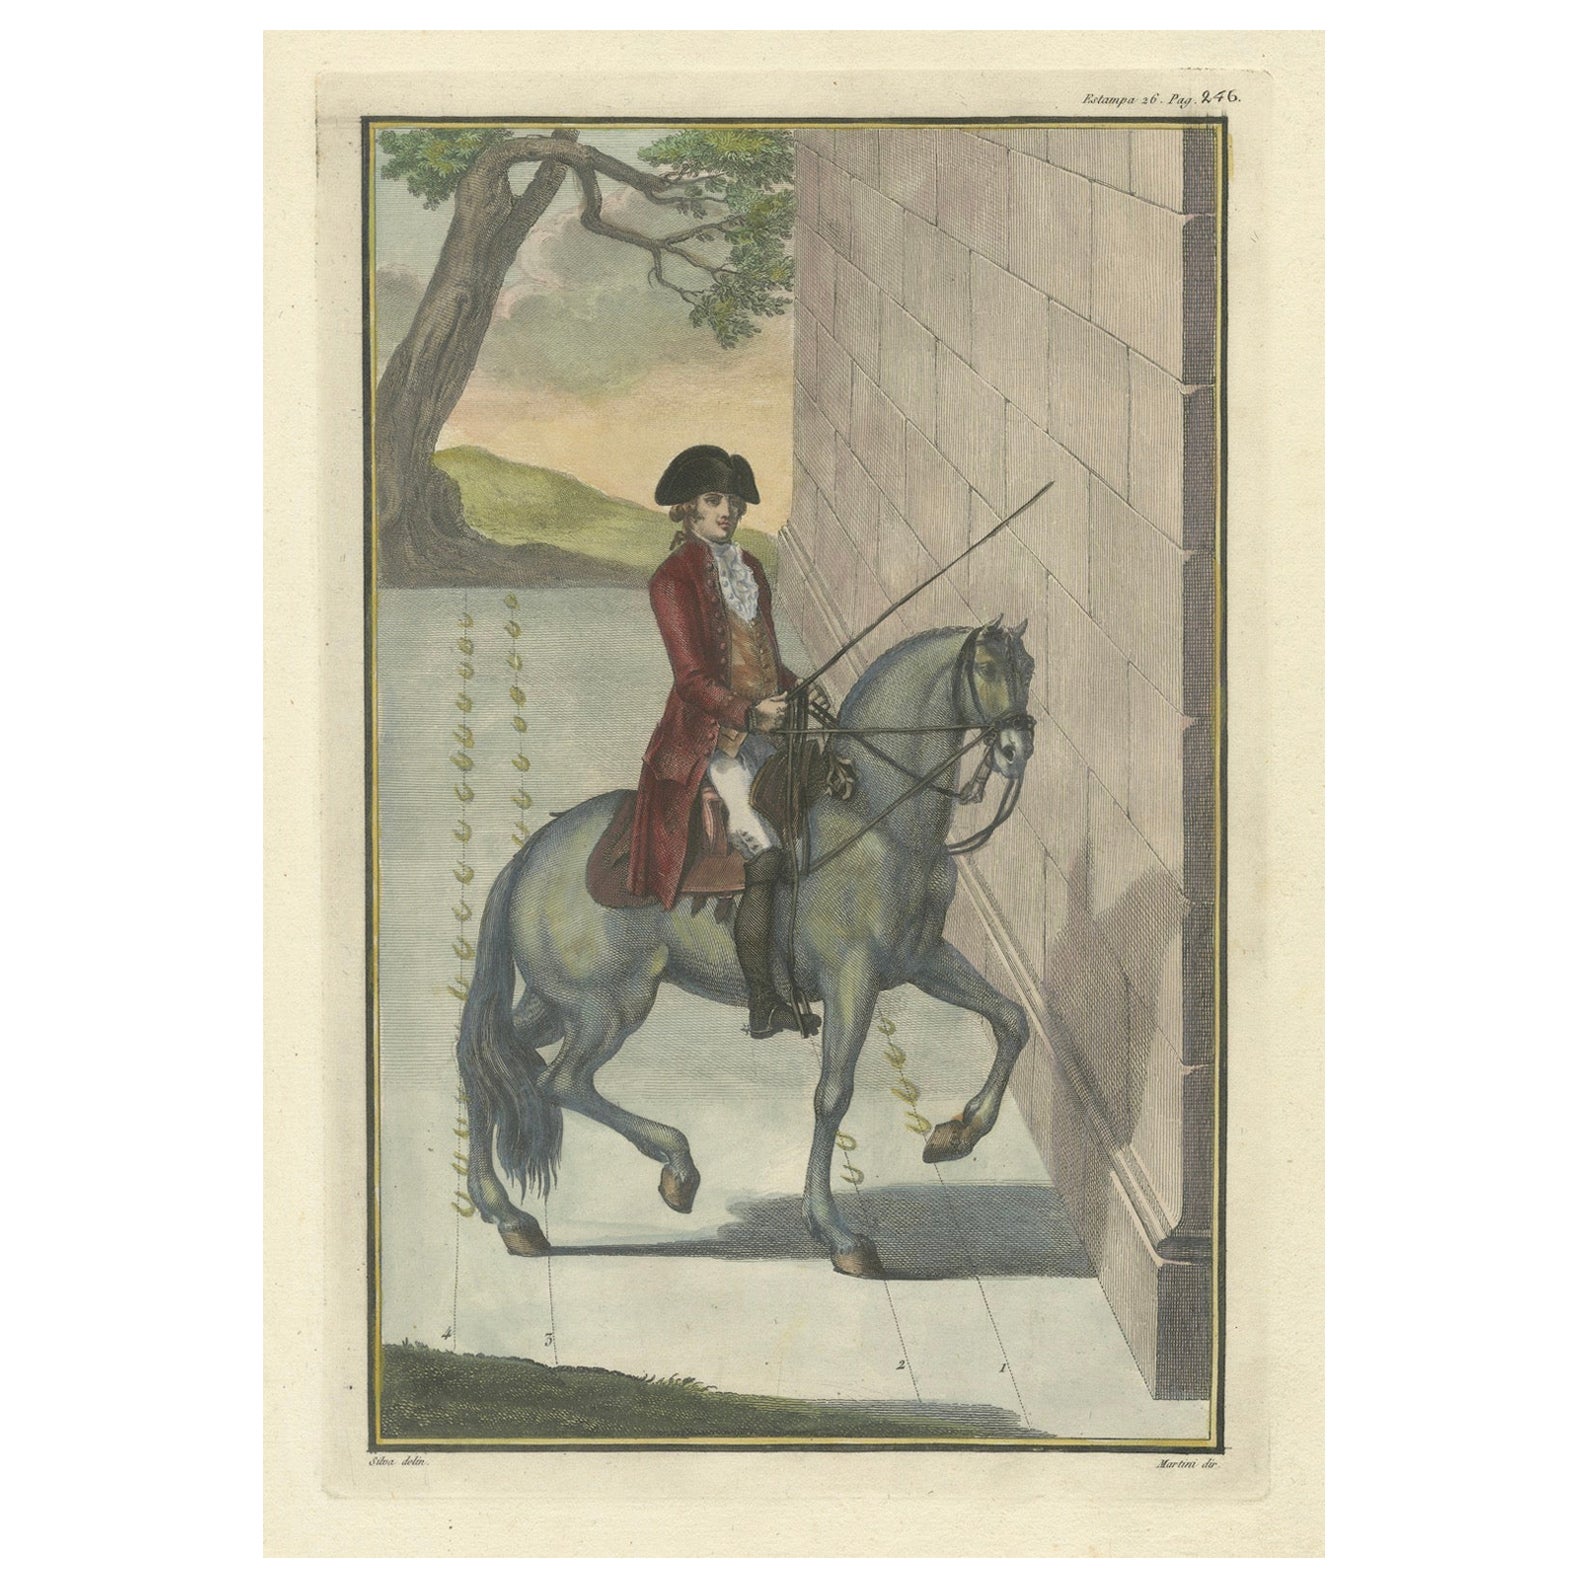 Antique Handpainted Equestrian Print from the Renowned Art of Horsemanship, 1790 For Sale